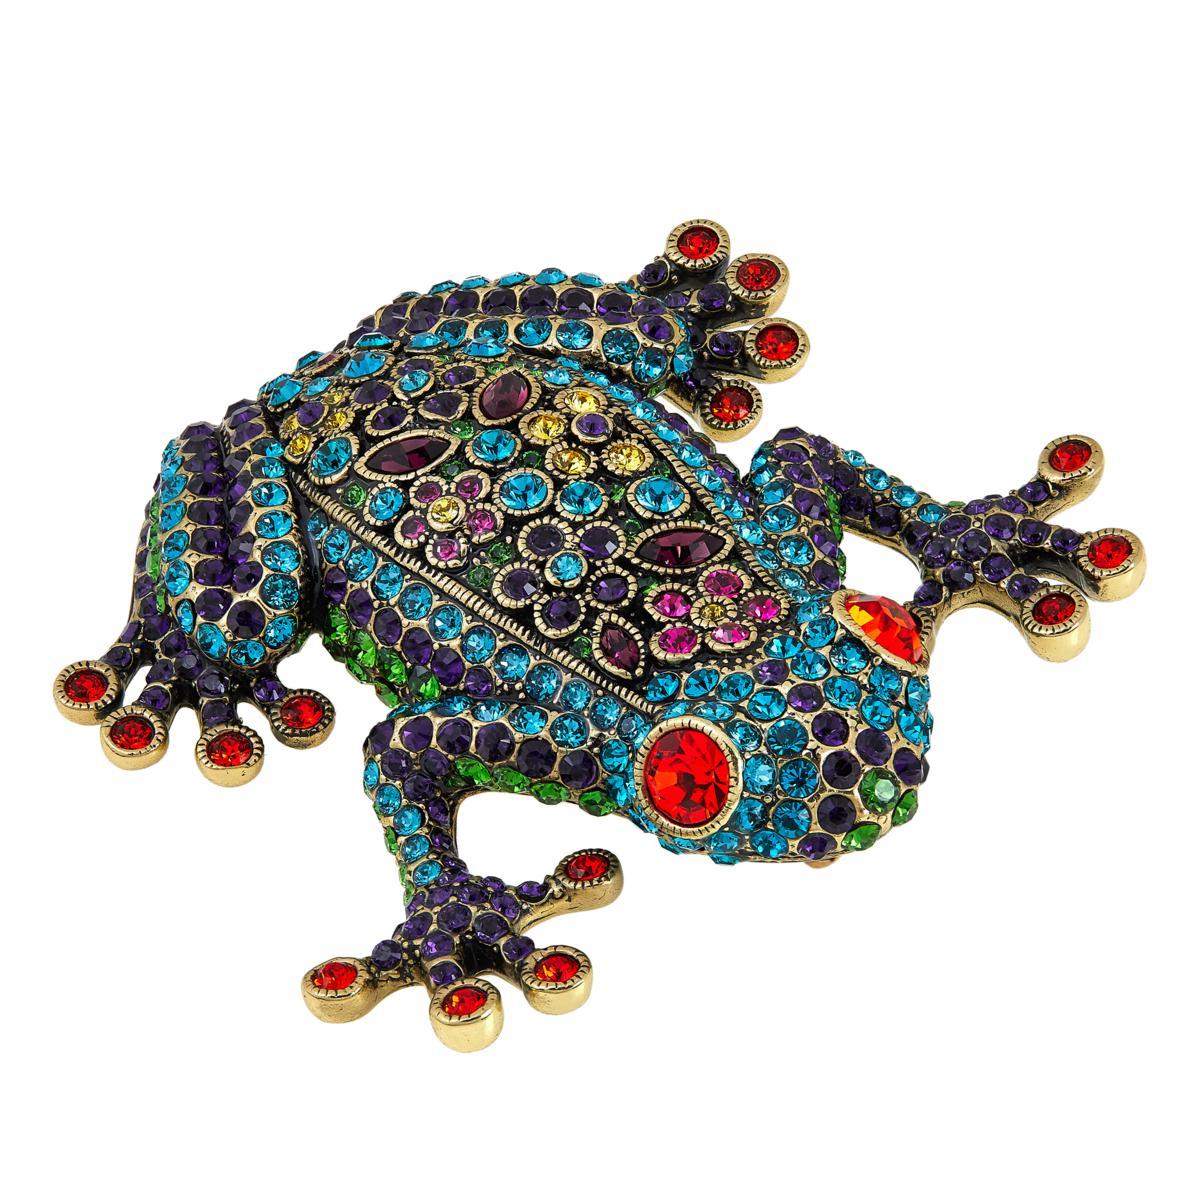 Pucker up! The perfect guy may not exist, but the perfect jewelry does. This whimsical frog design is waiting for you to transform your look with its sparkling style.

Design Information
Dimensional frog design covered in pavé round crystals